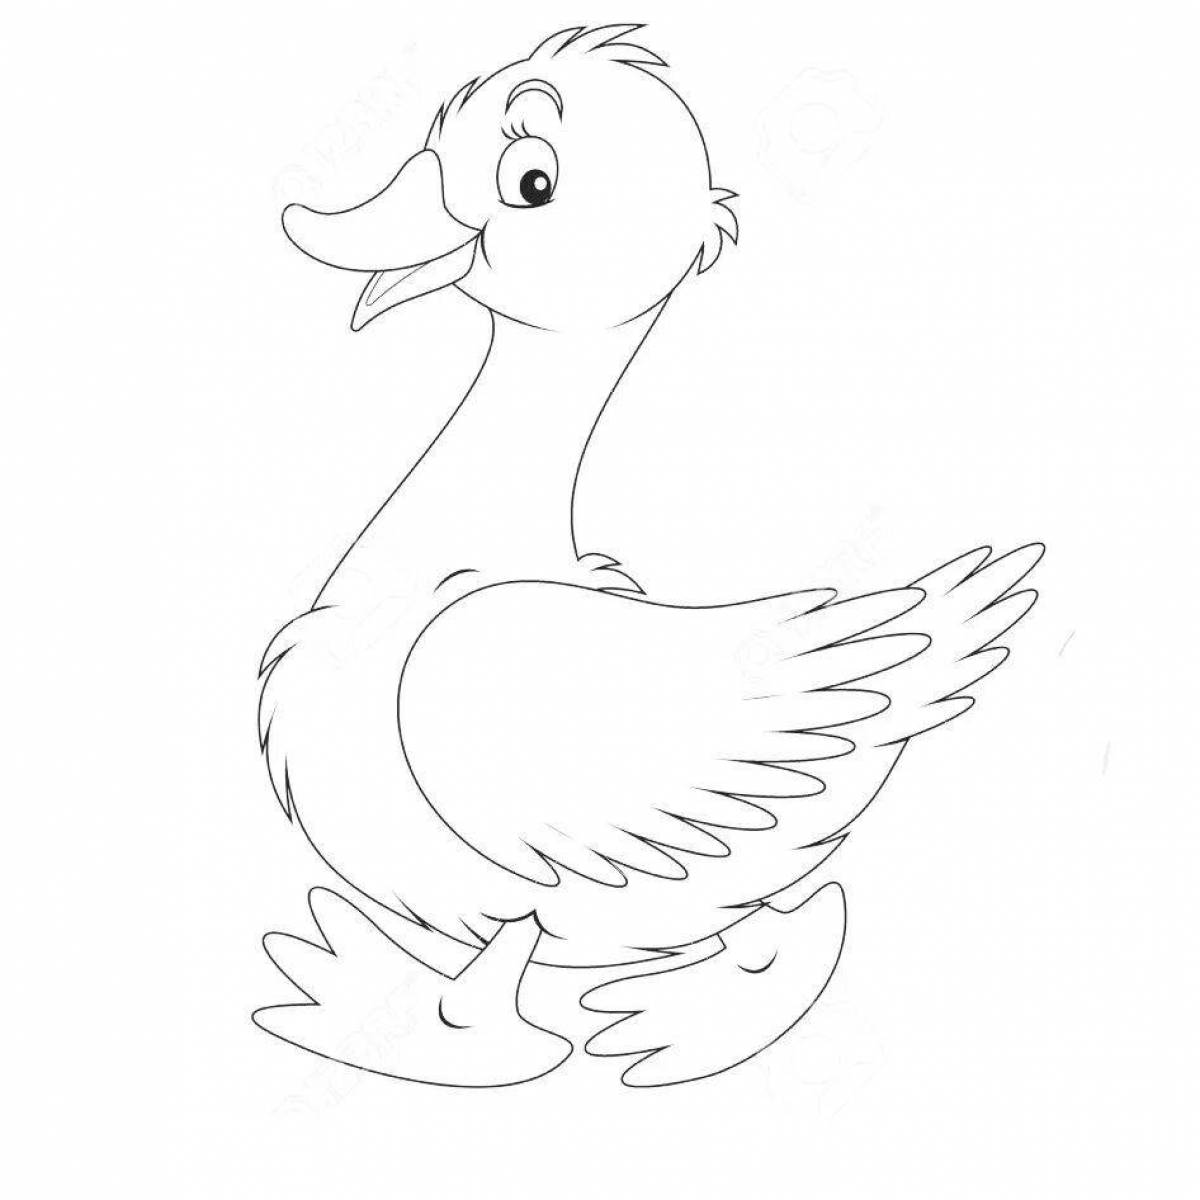 Coloring book joyful goose for children 6-7 years old